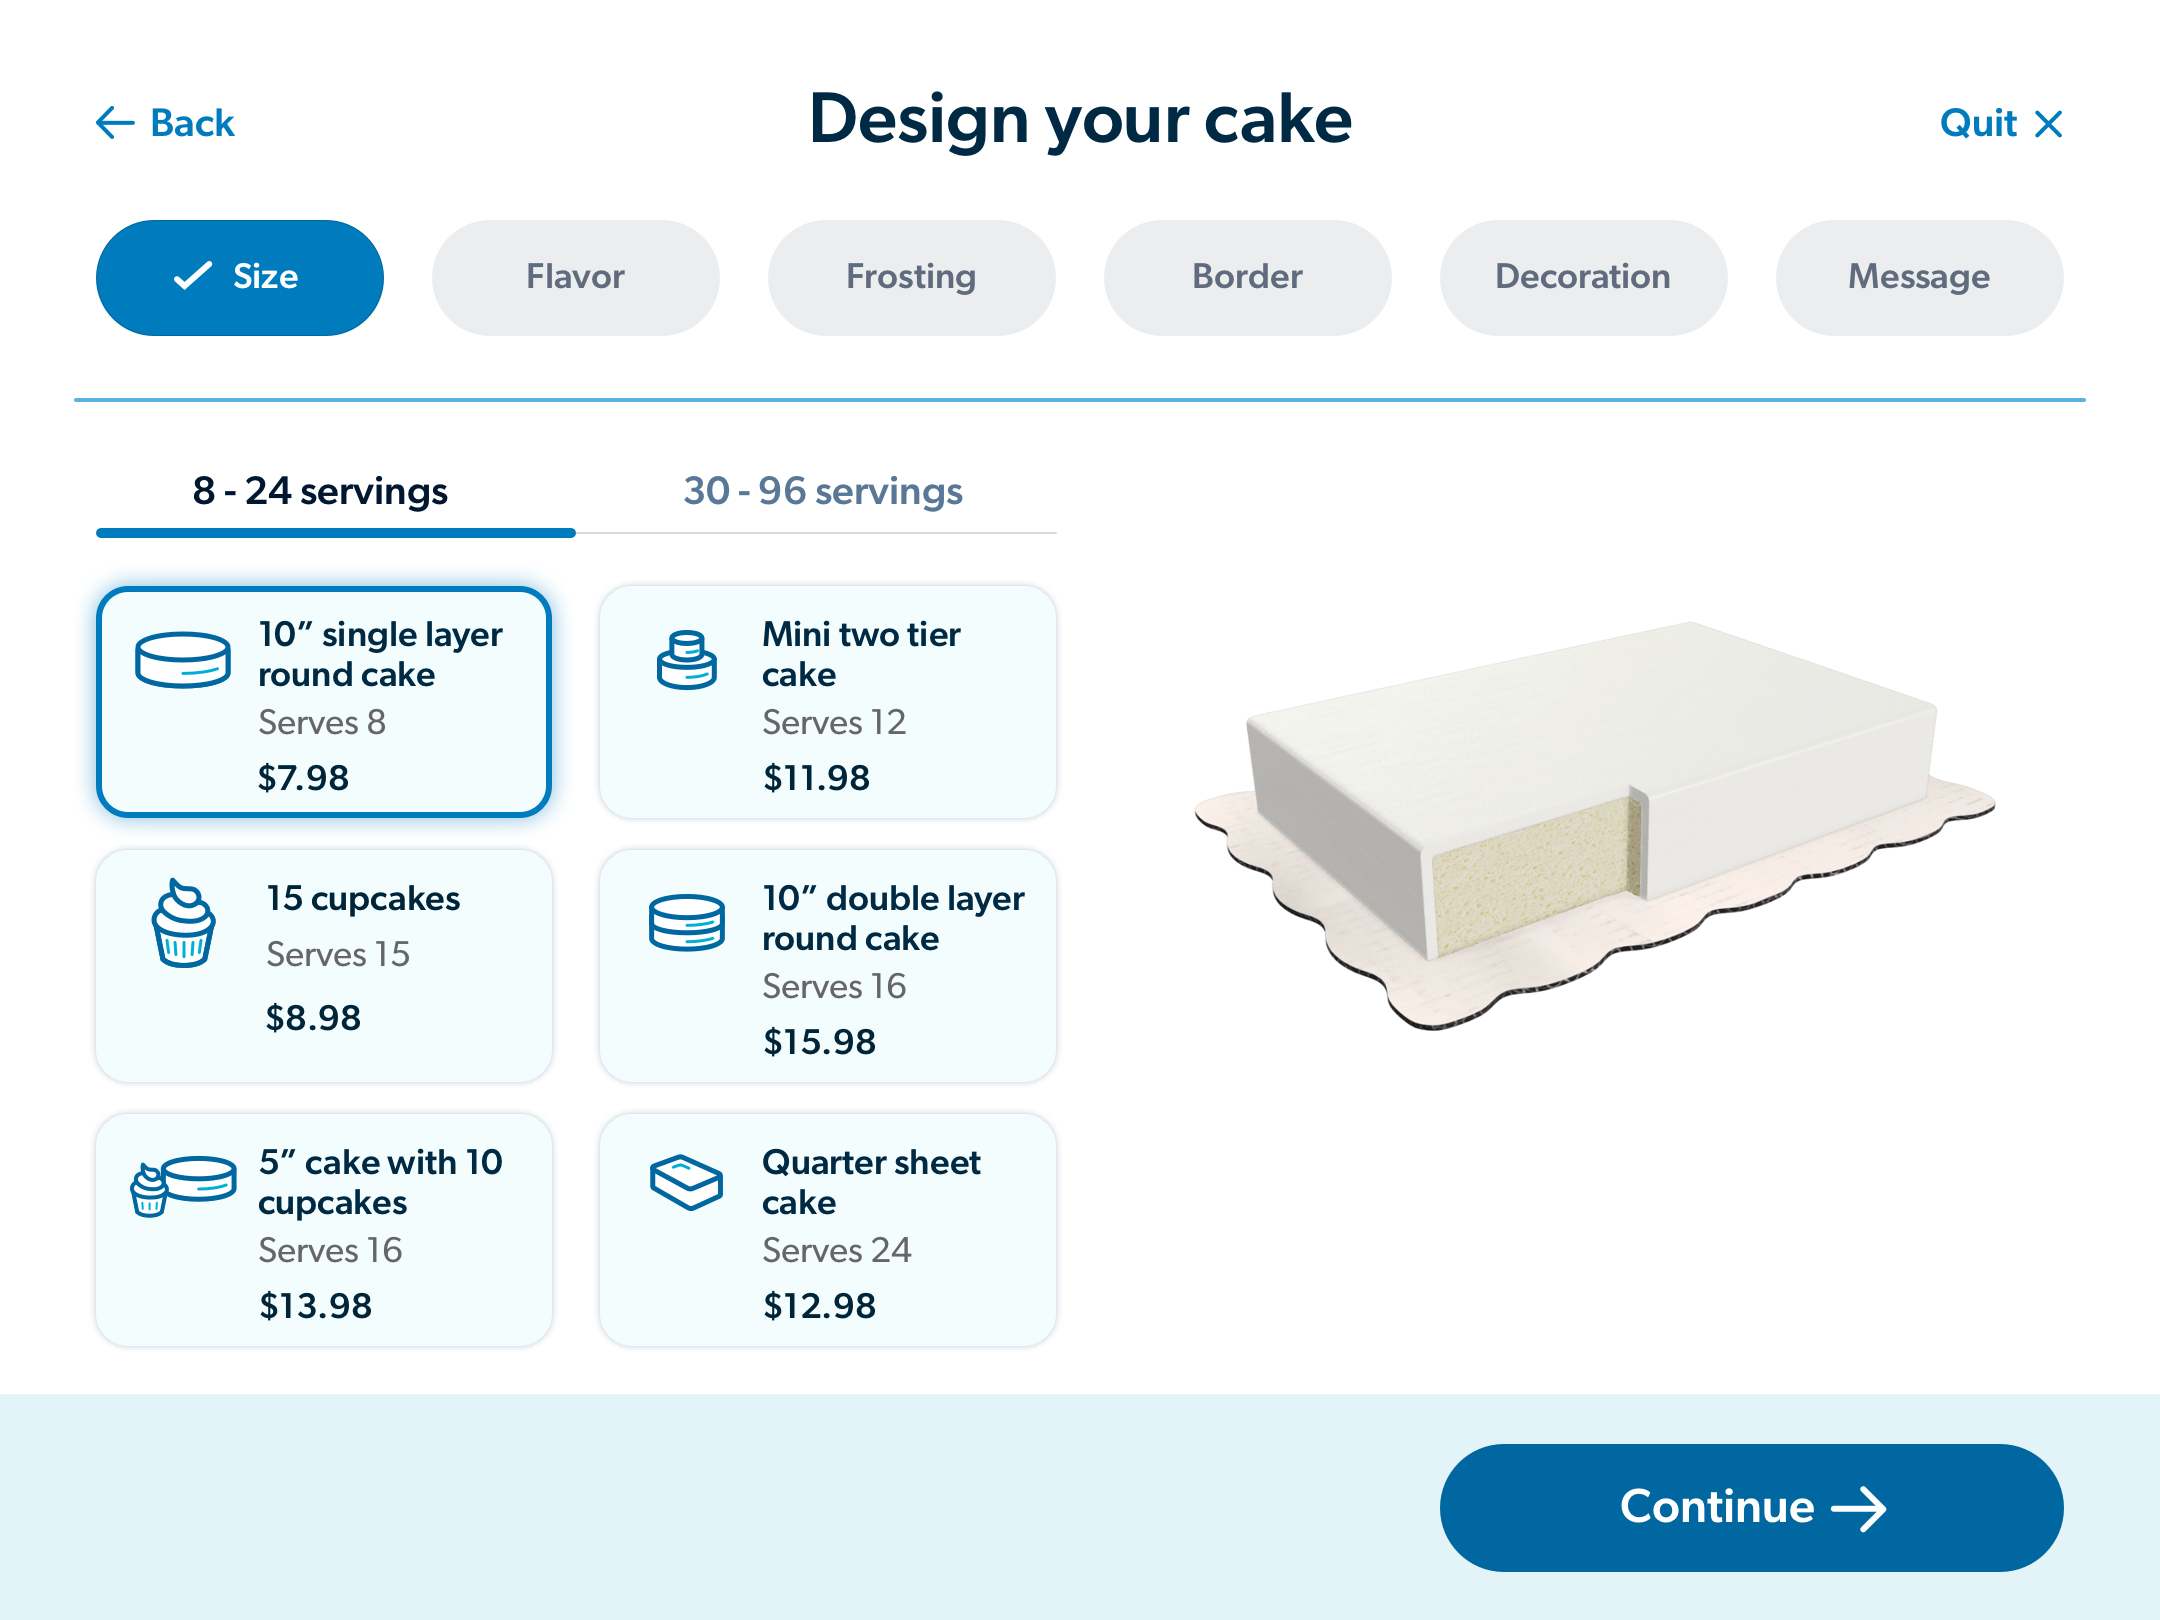 Select a size based on the number of servings and your preferred cake type. 